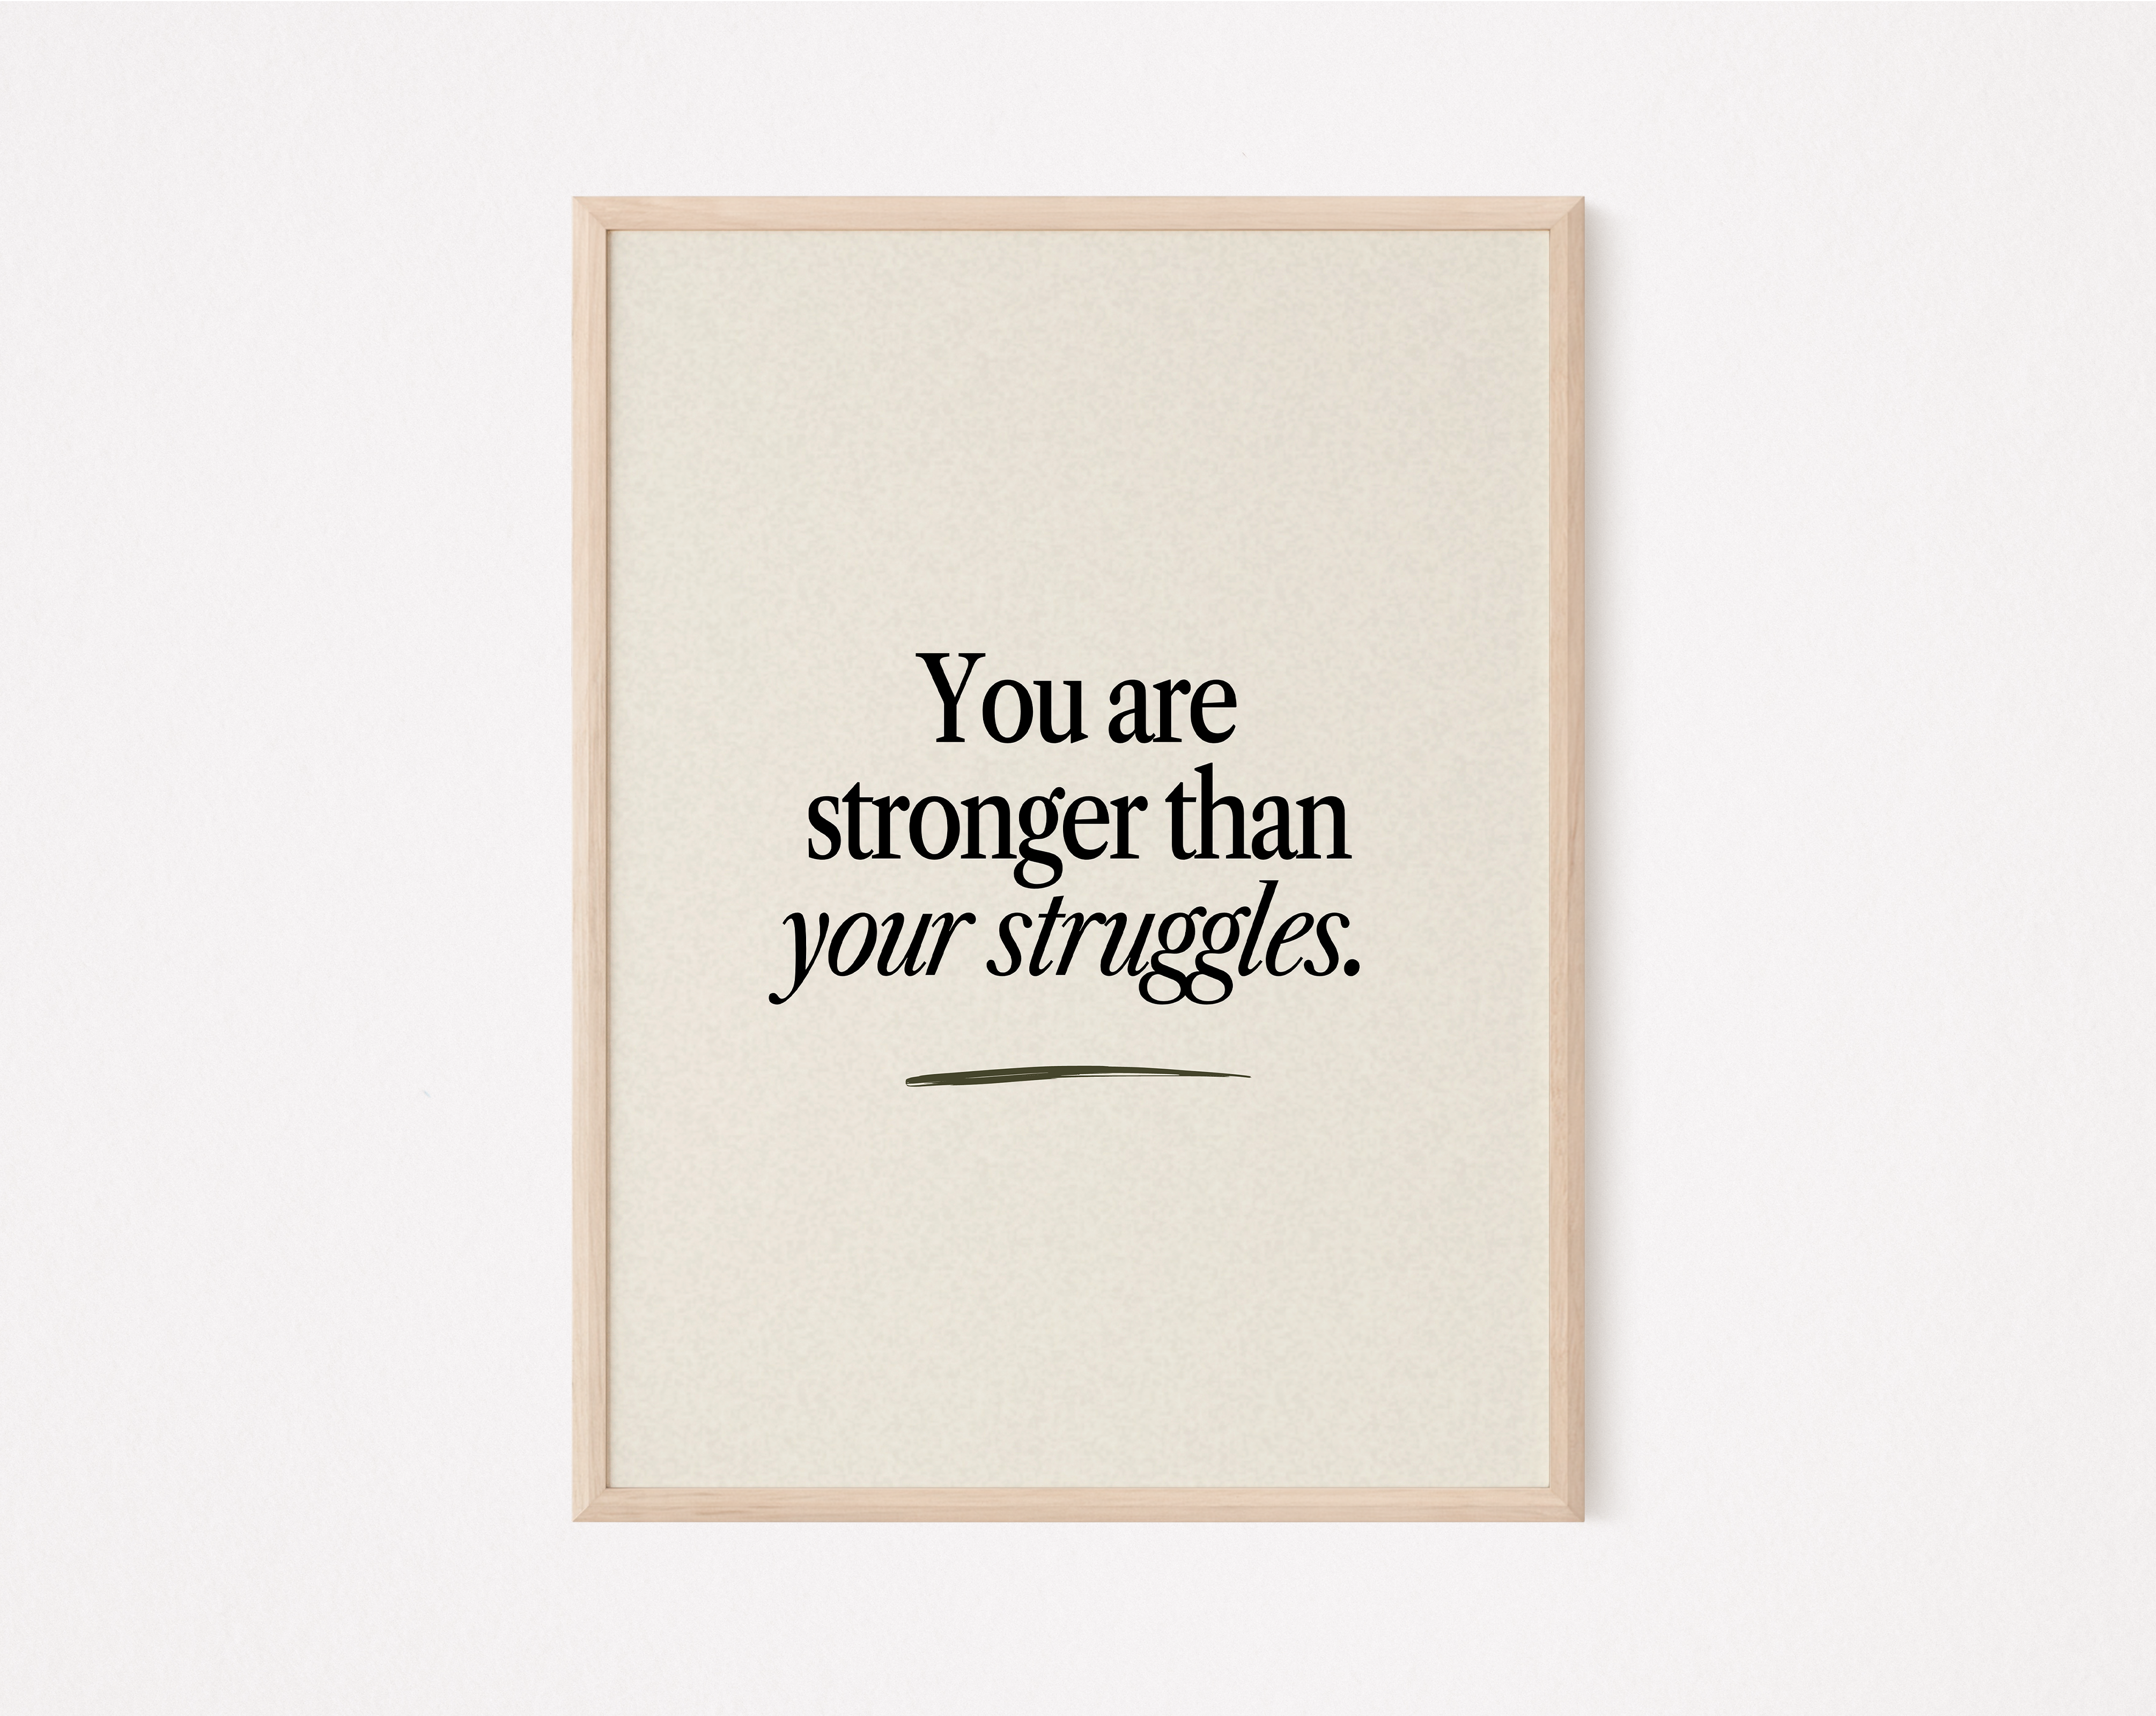 You are stronger thank your struggles (Digital Art Print)